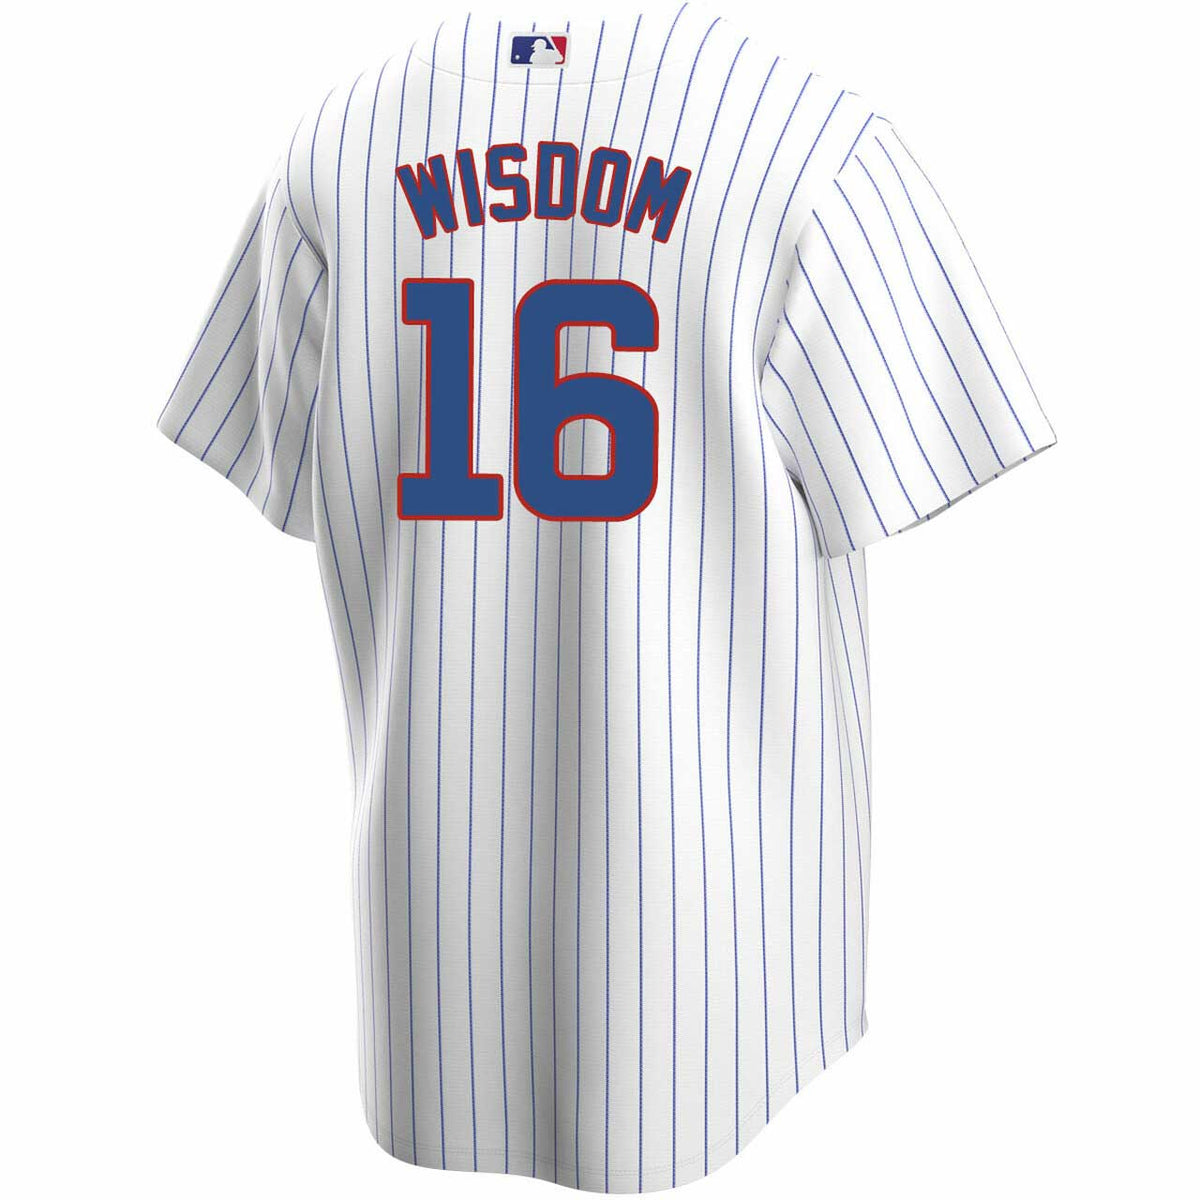 Medium Nike MLB Authentic Nico Hoerner Chicago Cubs Jersey for sale online